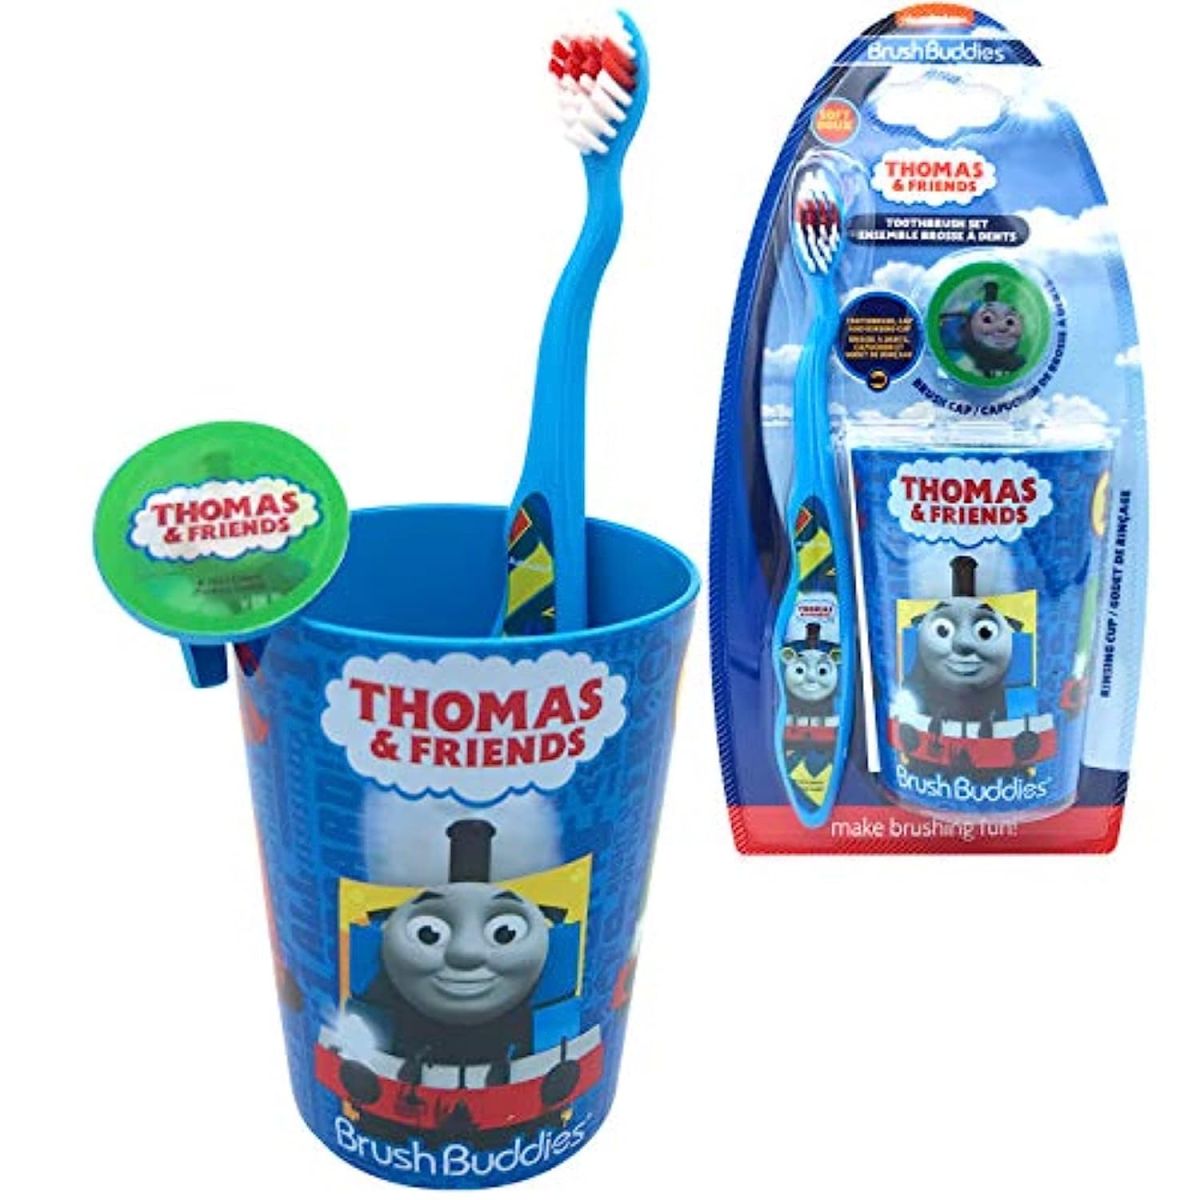 Thomas Premium Soft Bristle Toothbrush Set - Manual Toothbrush, Cover Cap, Rinsing Cup for Kids Girls Boys Children, Perfect for Birthday Gifts Goodies Favor